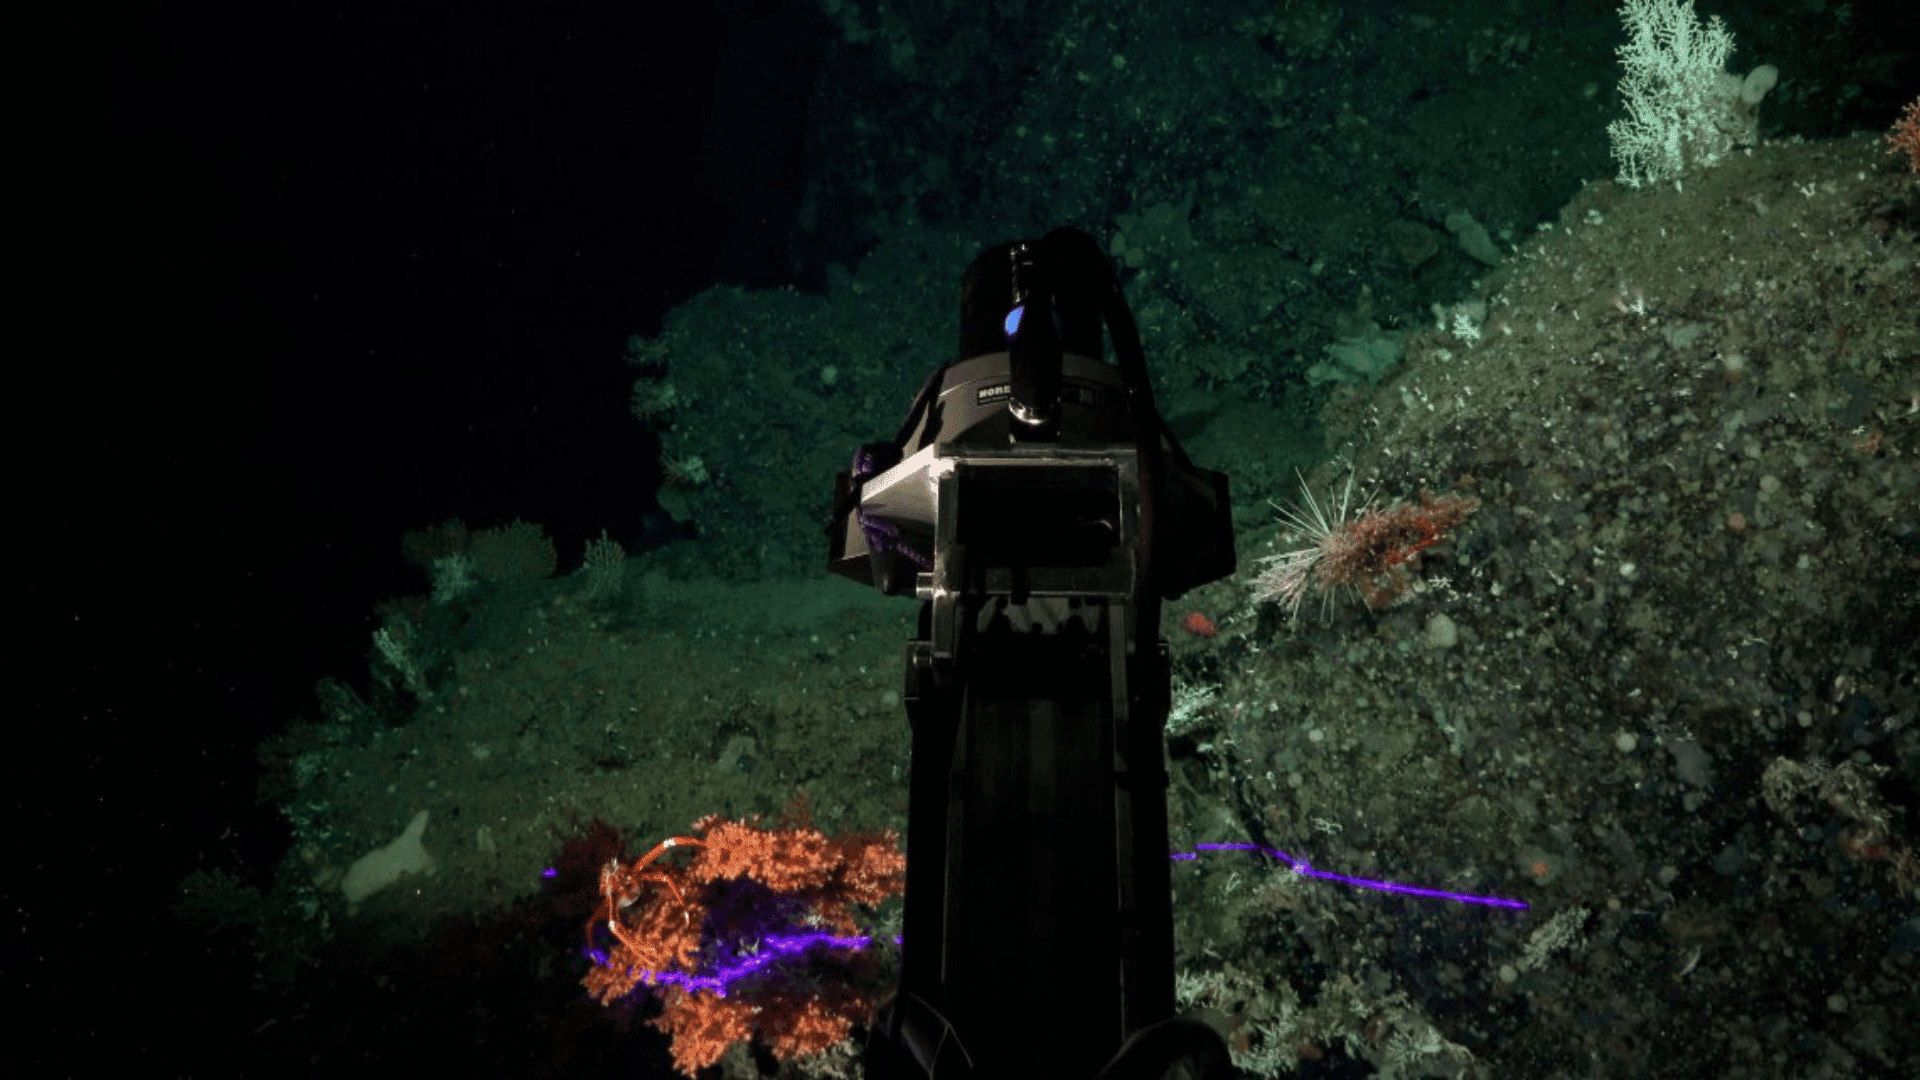 Remotely Operated Vehicle (ROV) SuBastian dove on Cacho De Coral, a newly discovered pristine coral reef